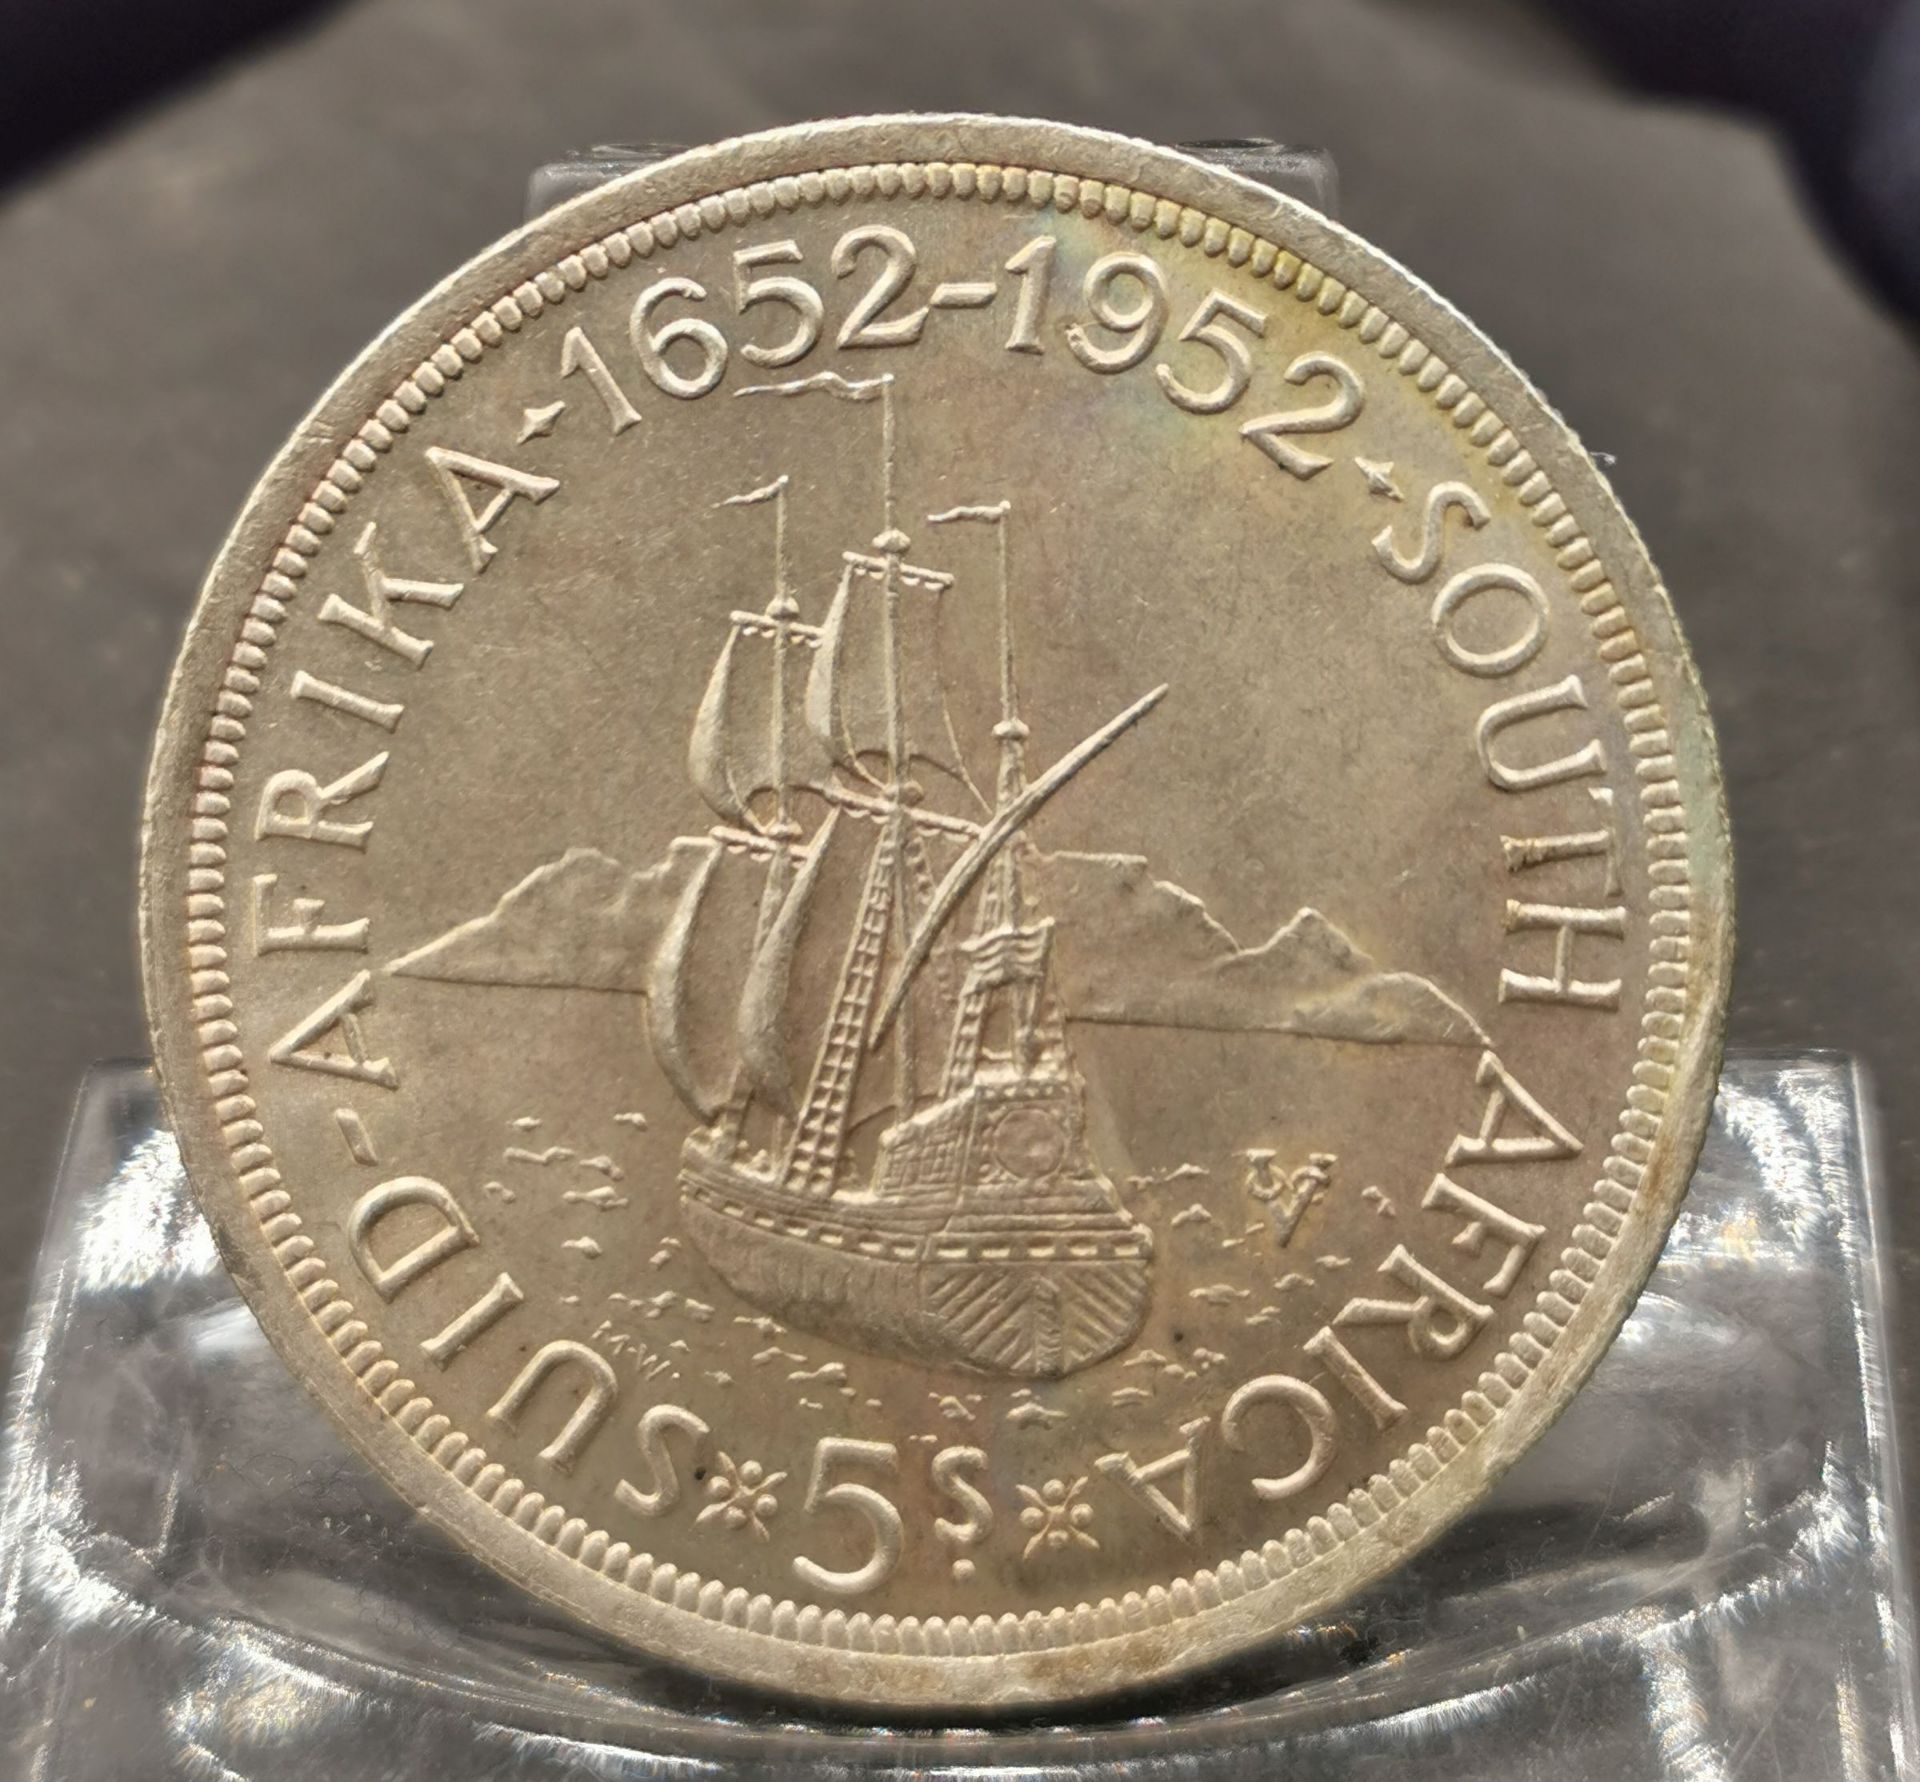 SOUTH AFRICA 5 SHILLINGS - Image 2 of 2